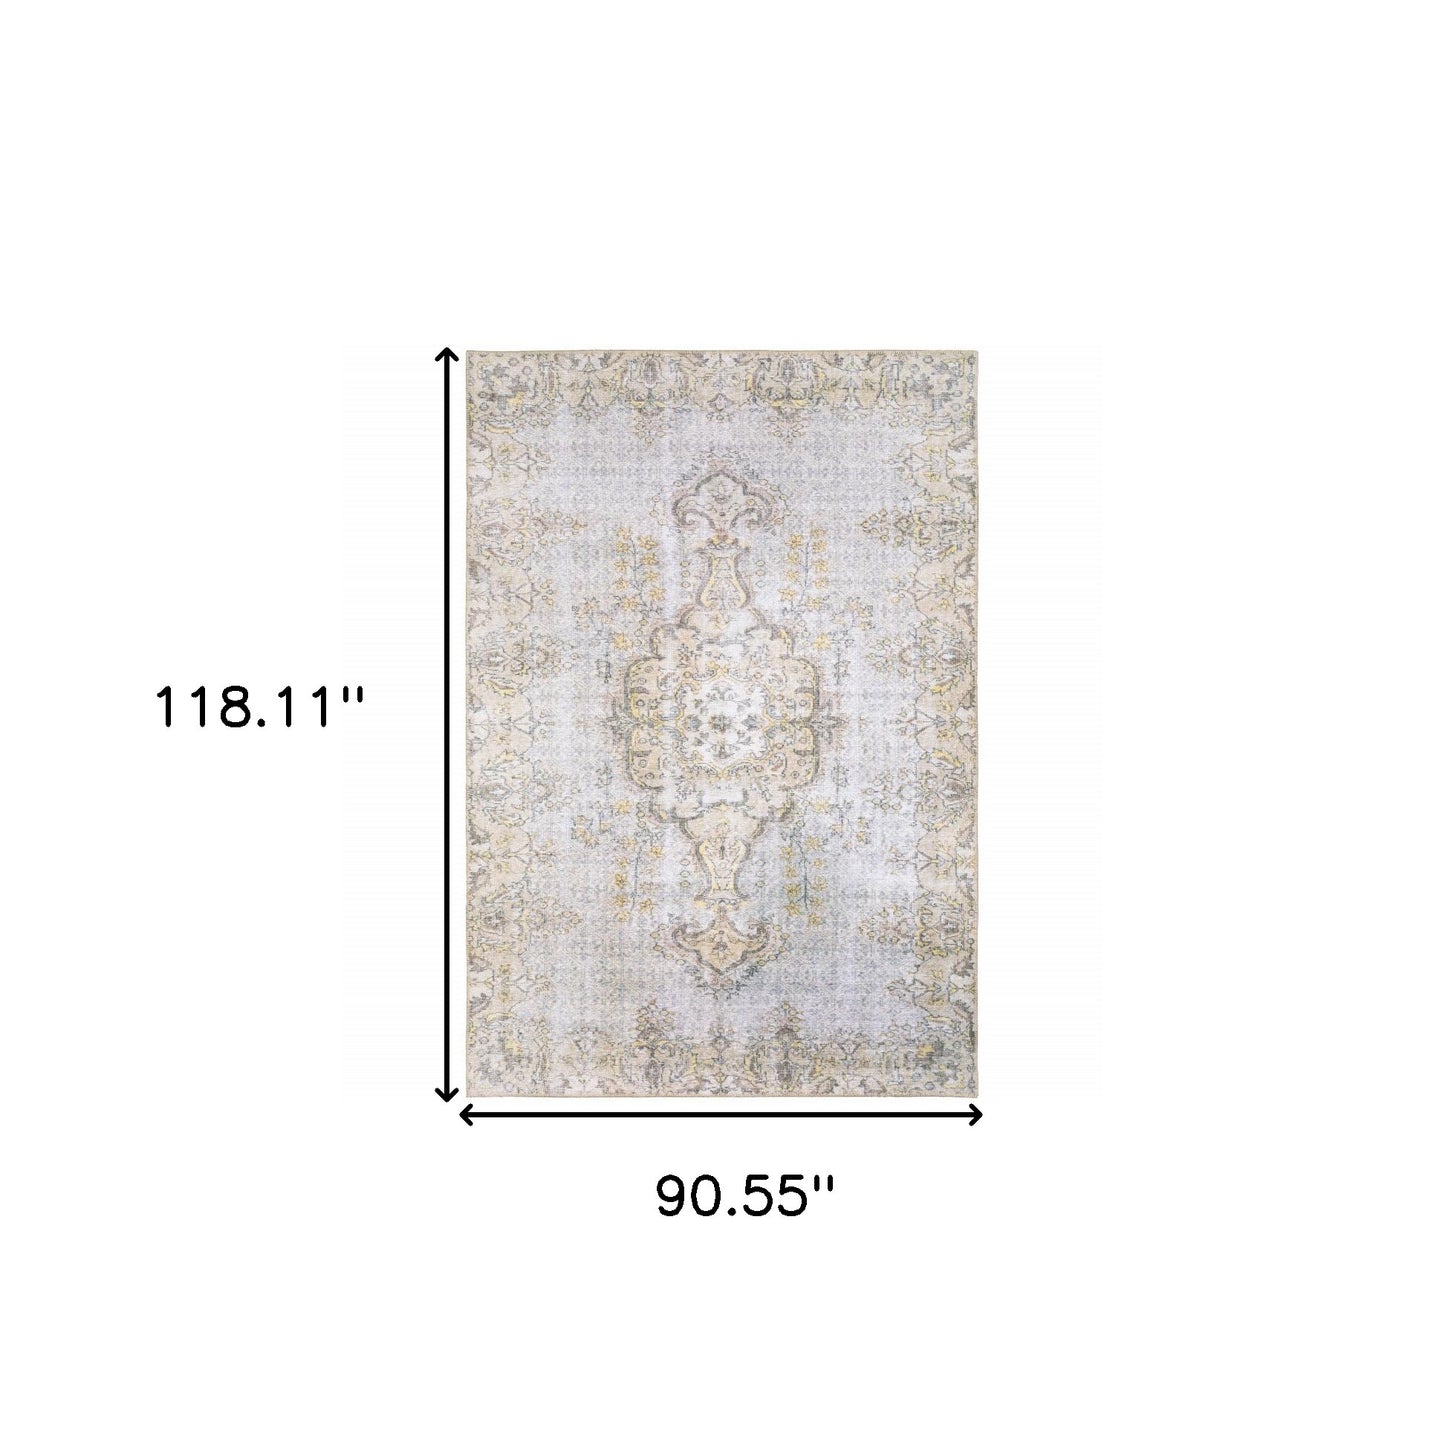 8' X 10' Grey And Gold Oriental Power Loom Stain Resistant Area Rug